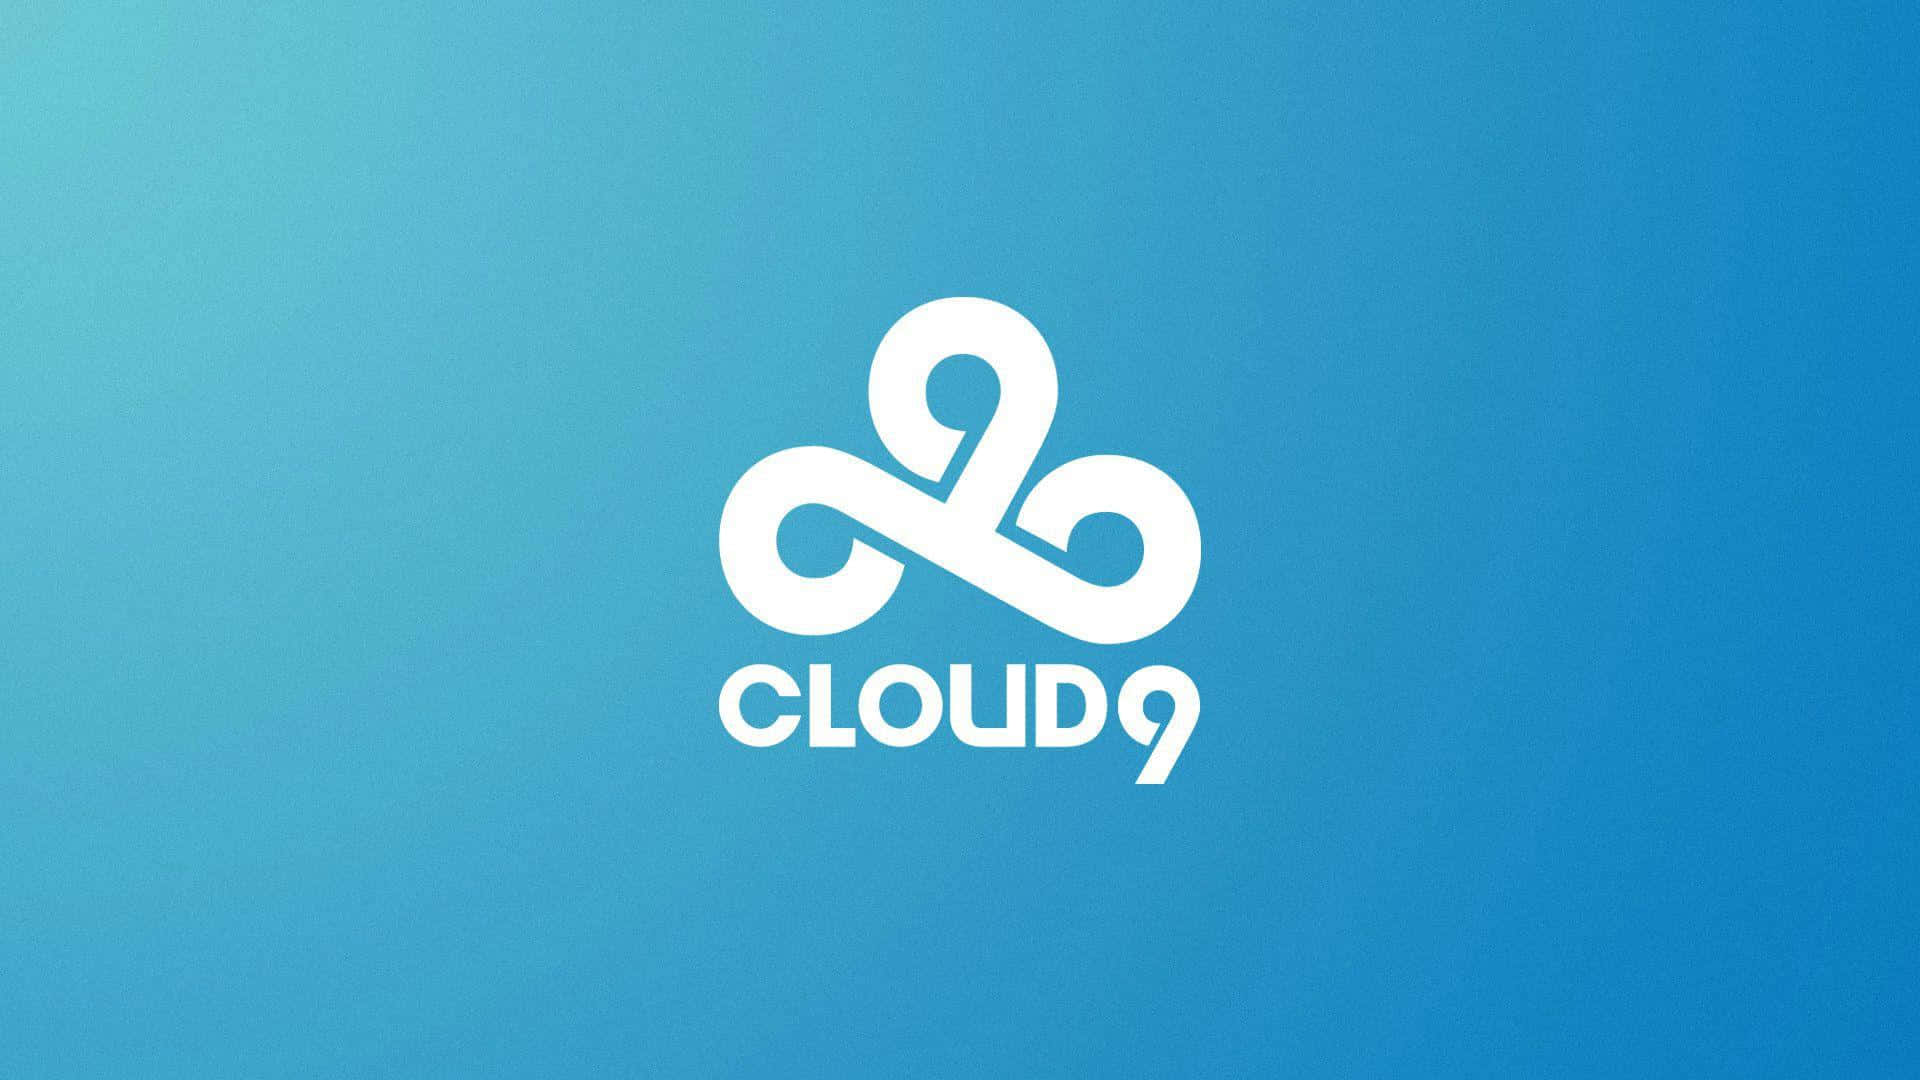 Soaring With Cloud 9 Wallpaper